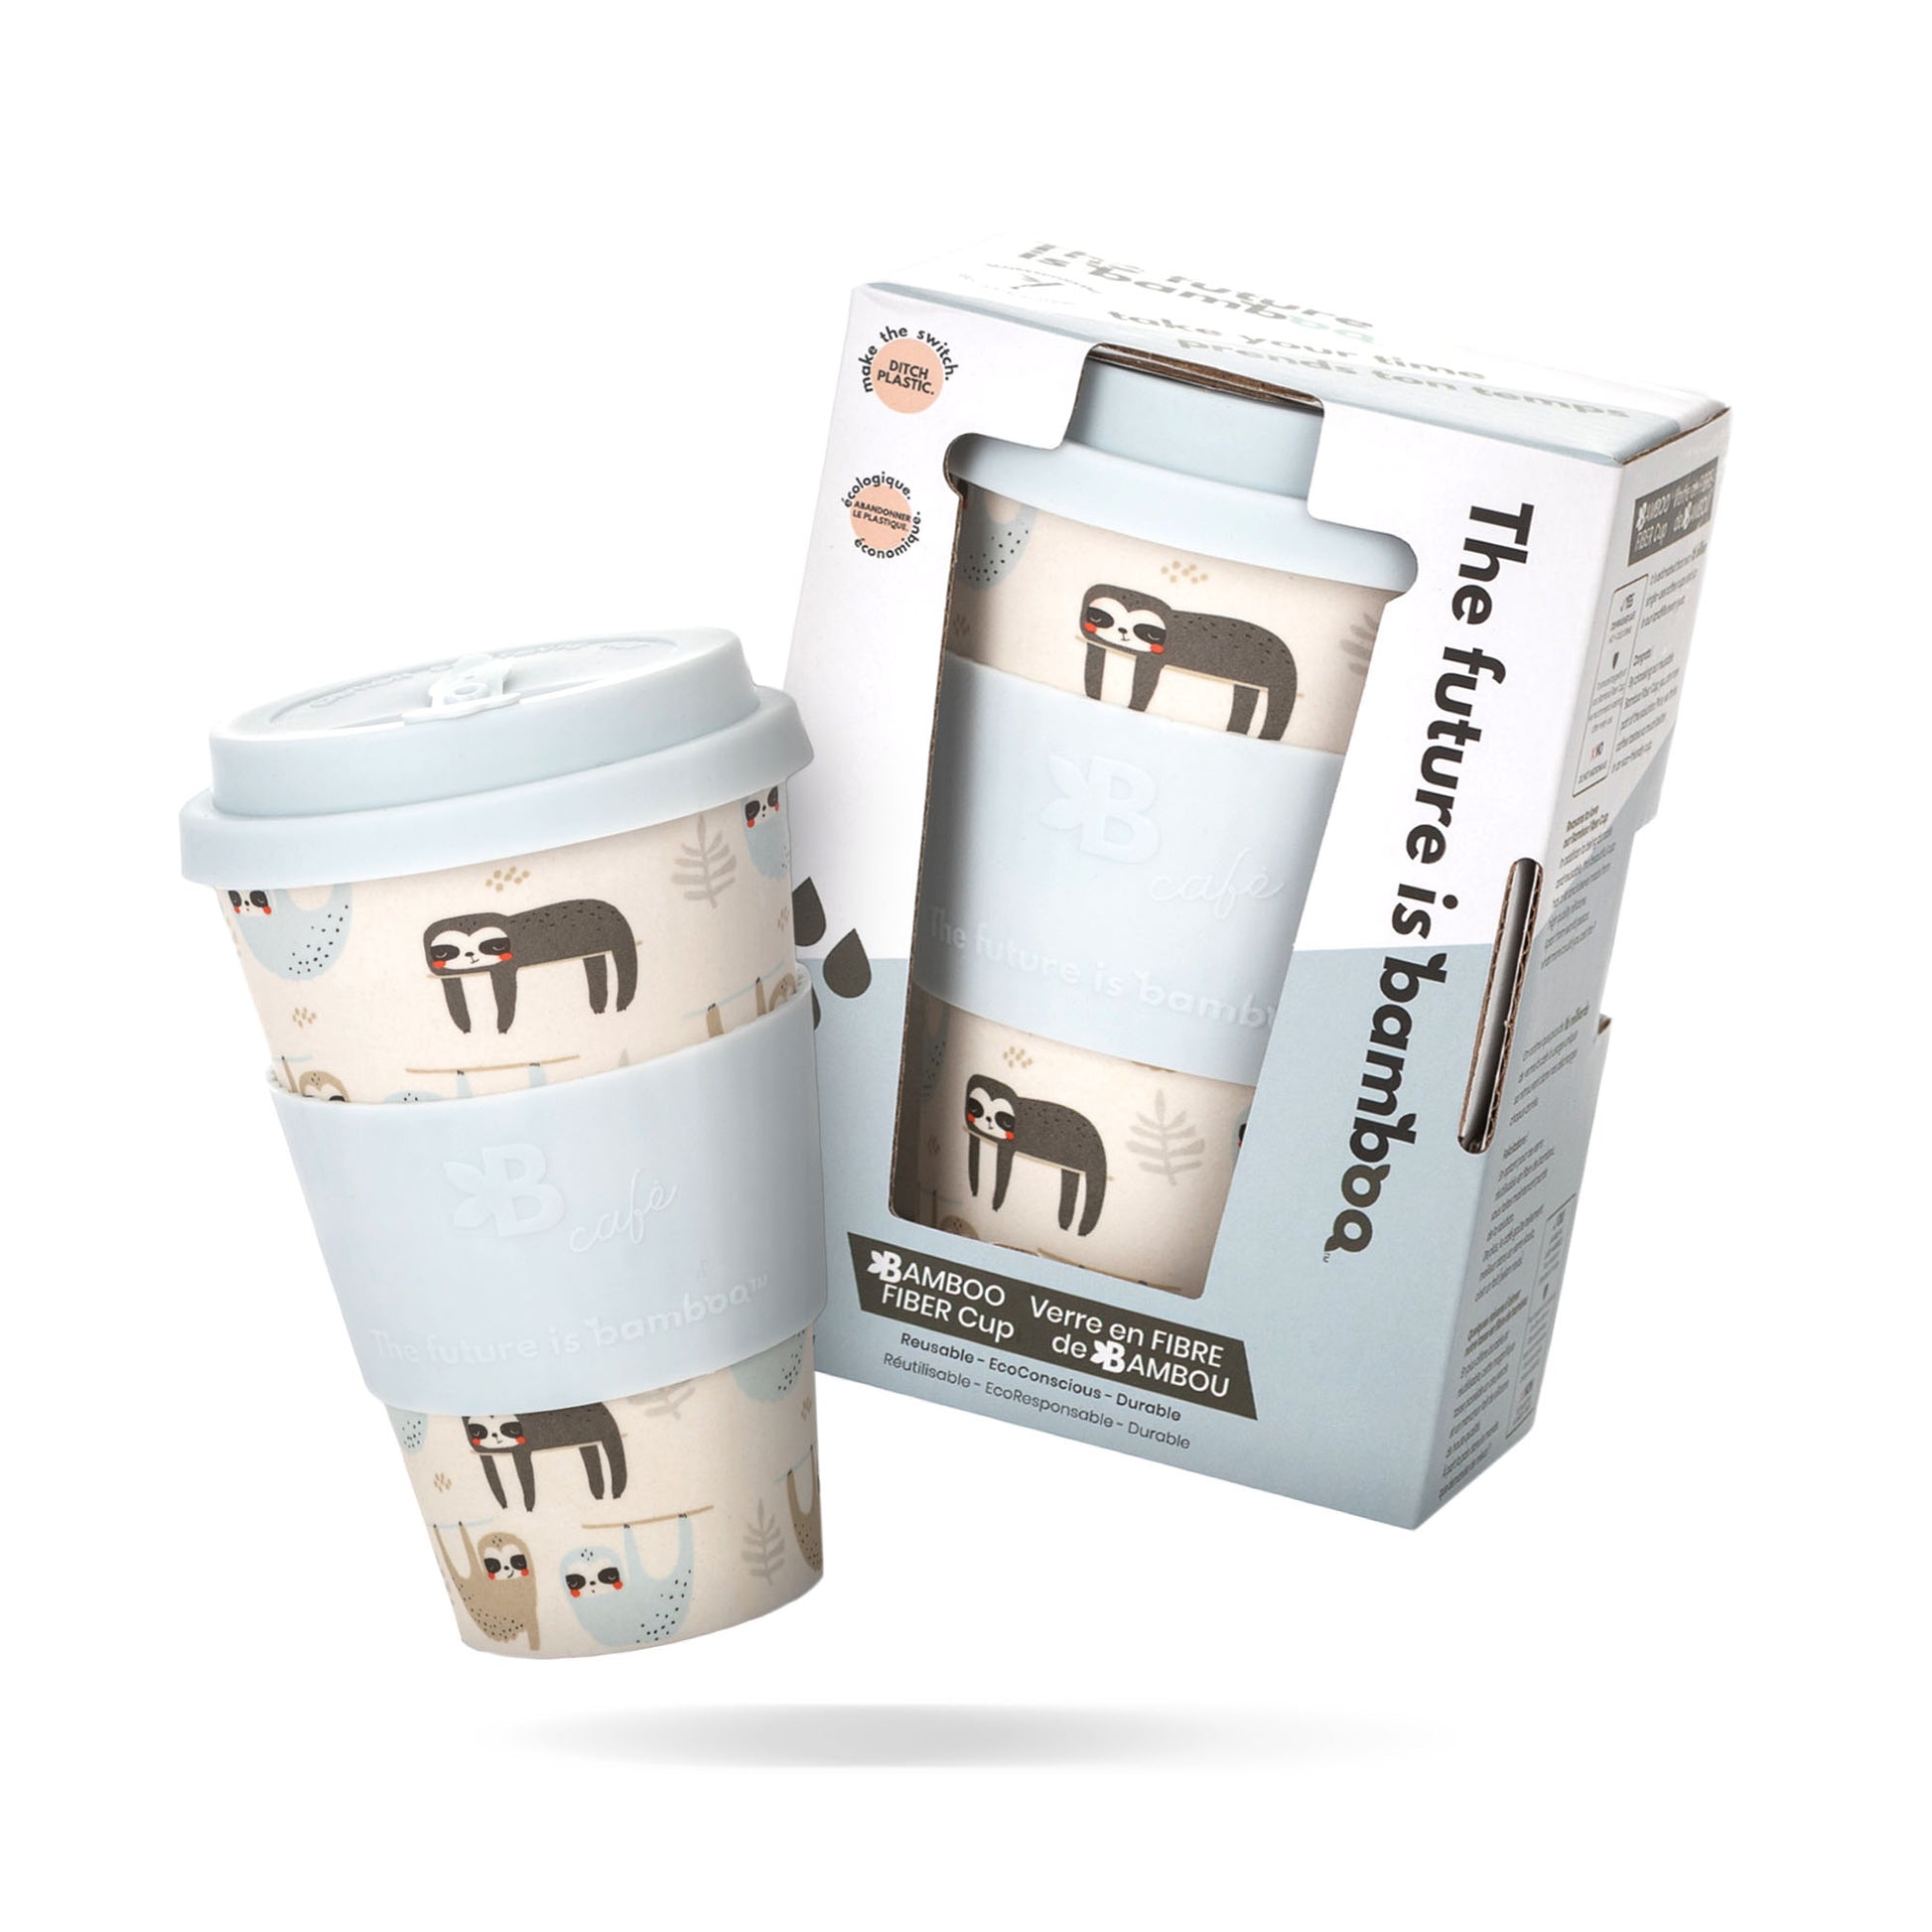 Product review: Reusaboo bamboo coffee cup - Just Can't Settle